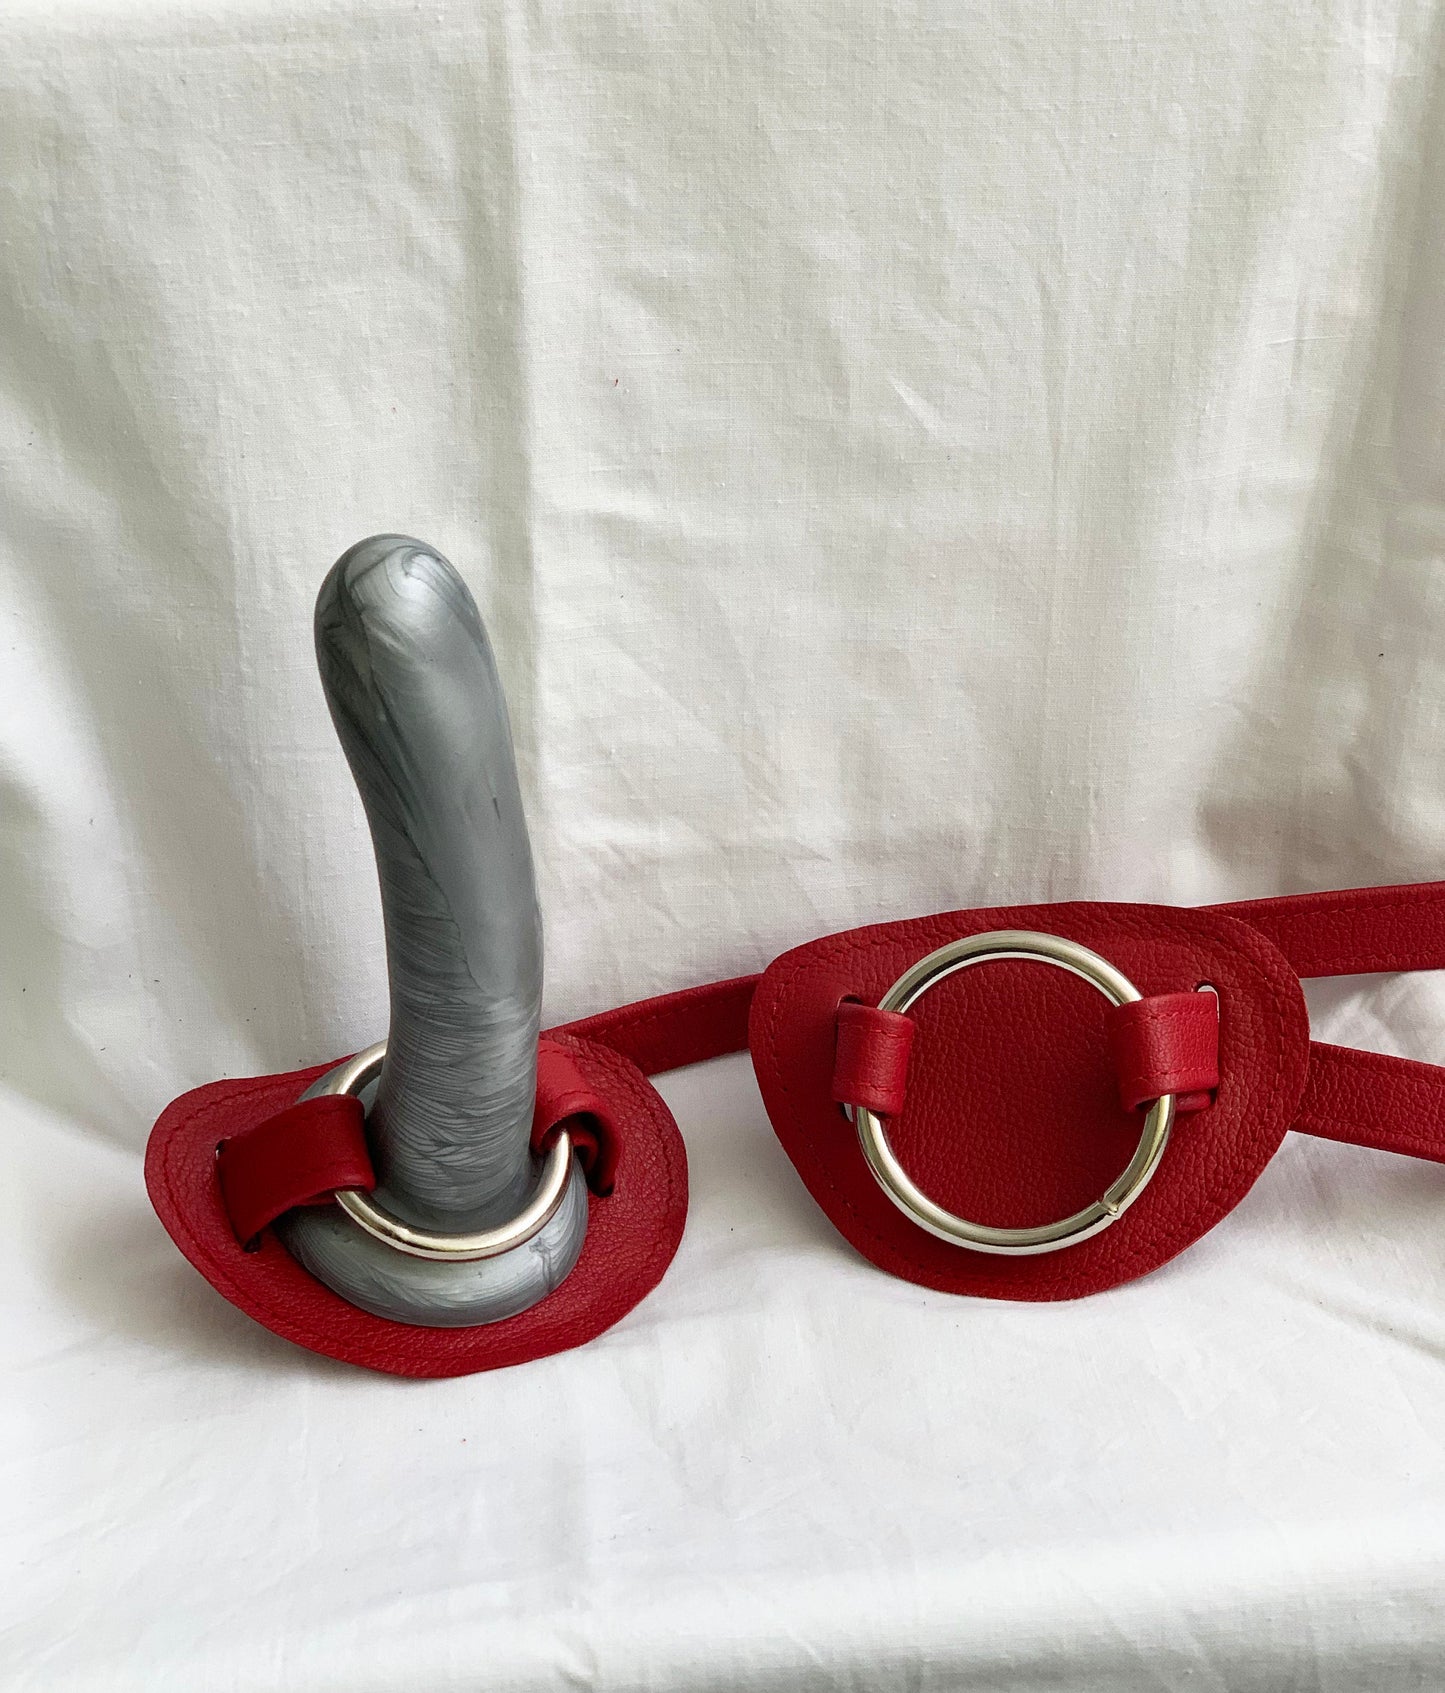 Hand Harness Strapon (Knucklefucker) - Red Leather (One Size)